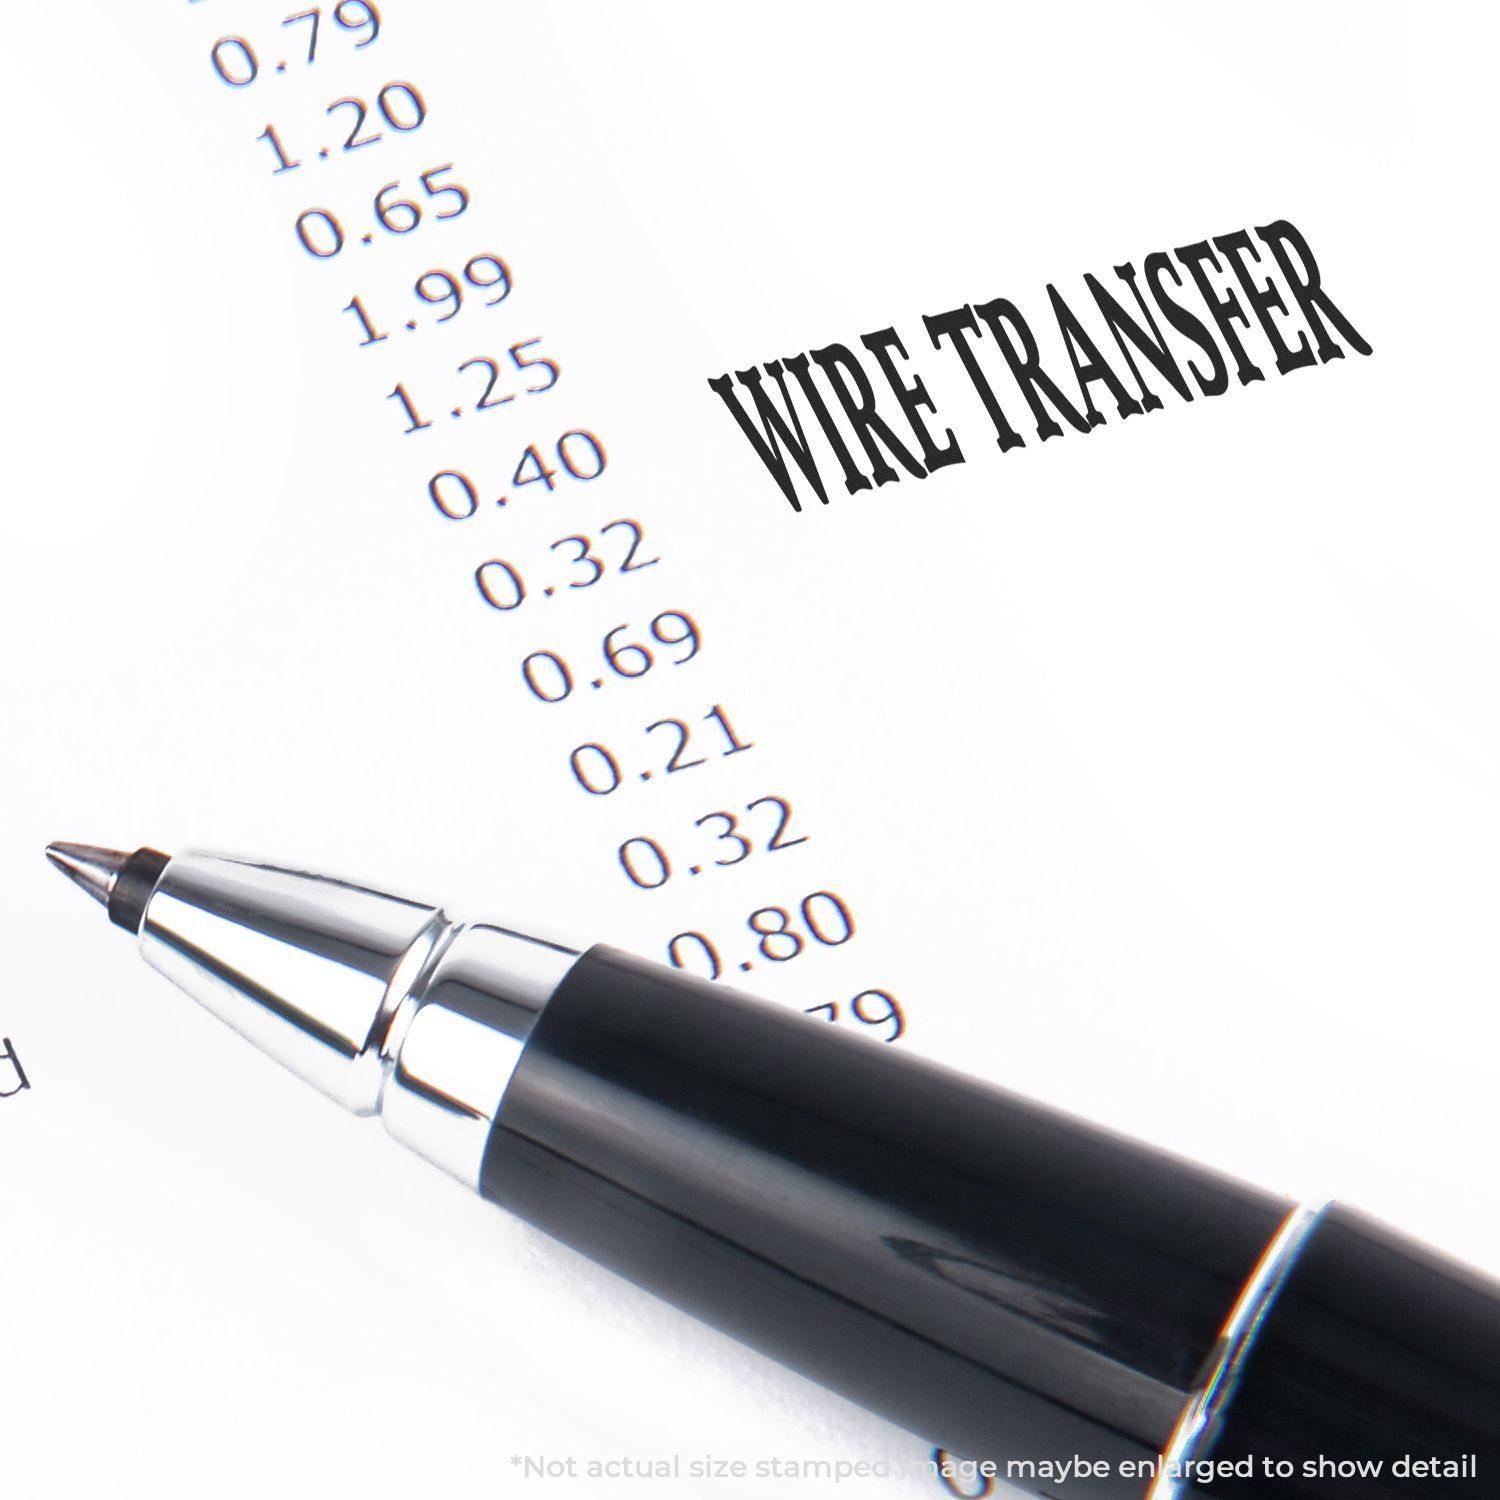 A stock office rubber stamp with a stamped image showing how the text "WIRE TRANSFER" is displayed after stamping.